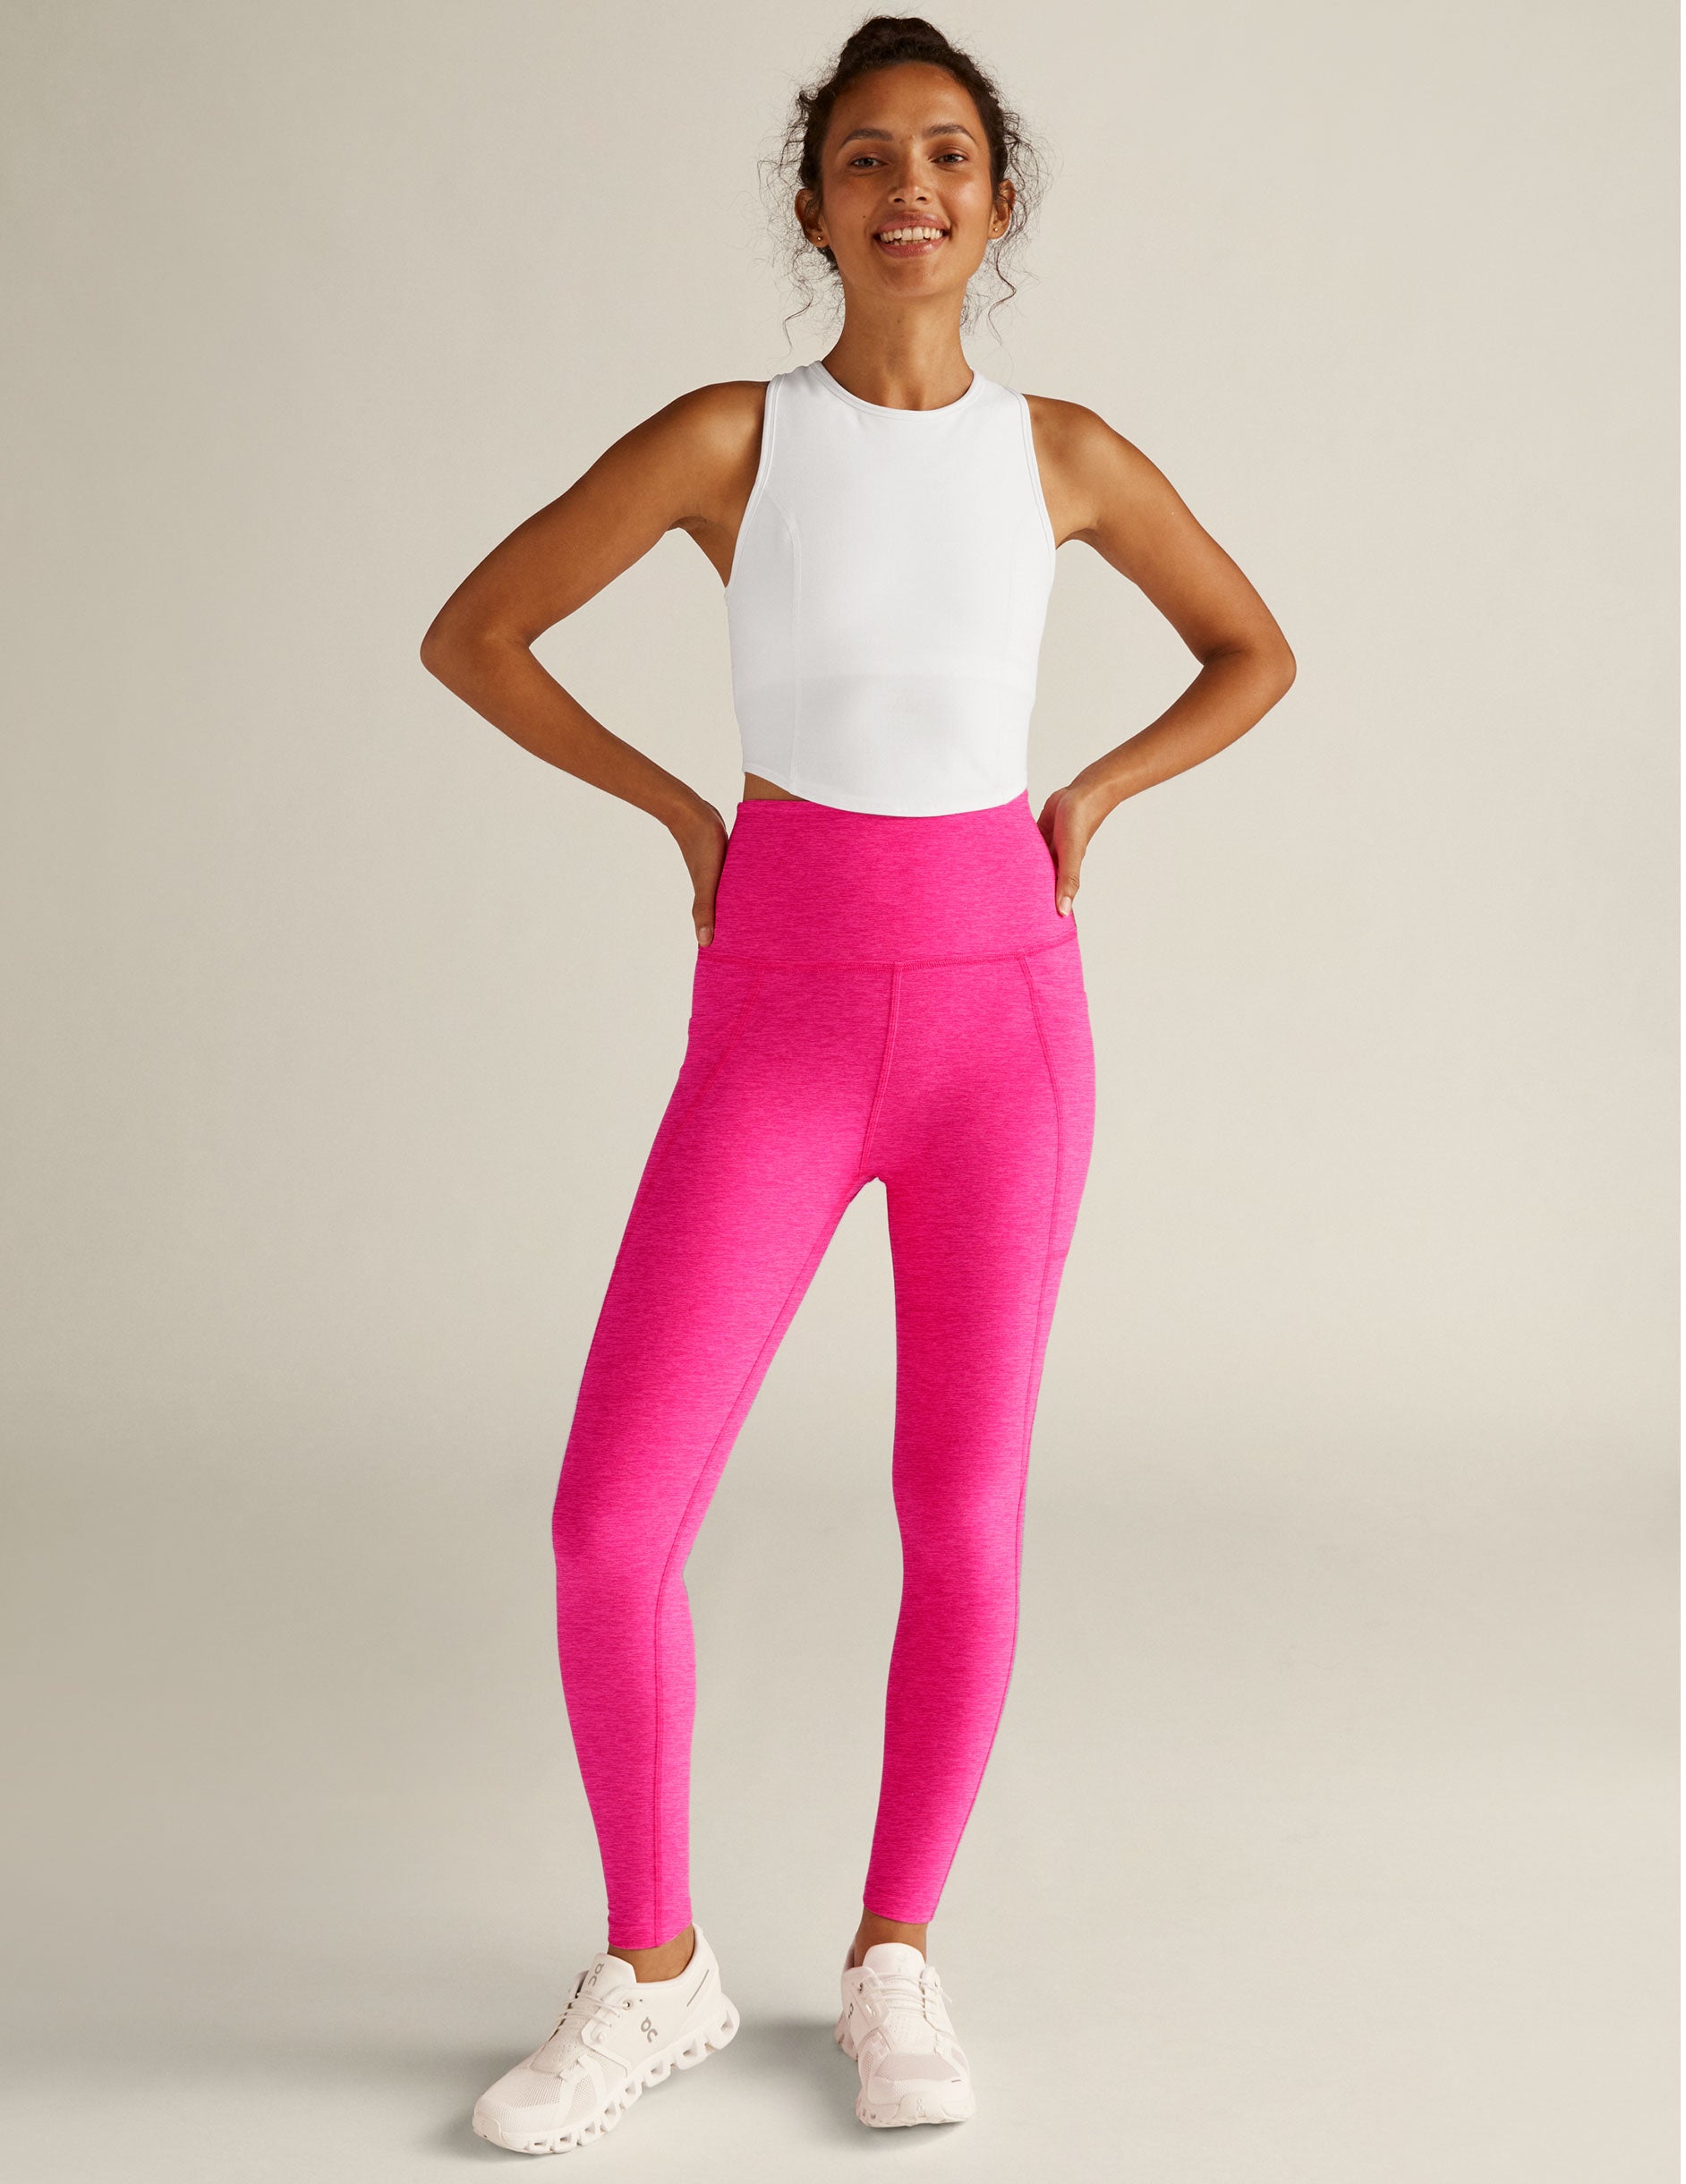 BEYOND YOGA SPACEDYE KEEP PACE BIKER SHORT - PINK PUNCH HEATHER SD5111 –  Work It Out